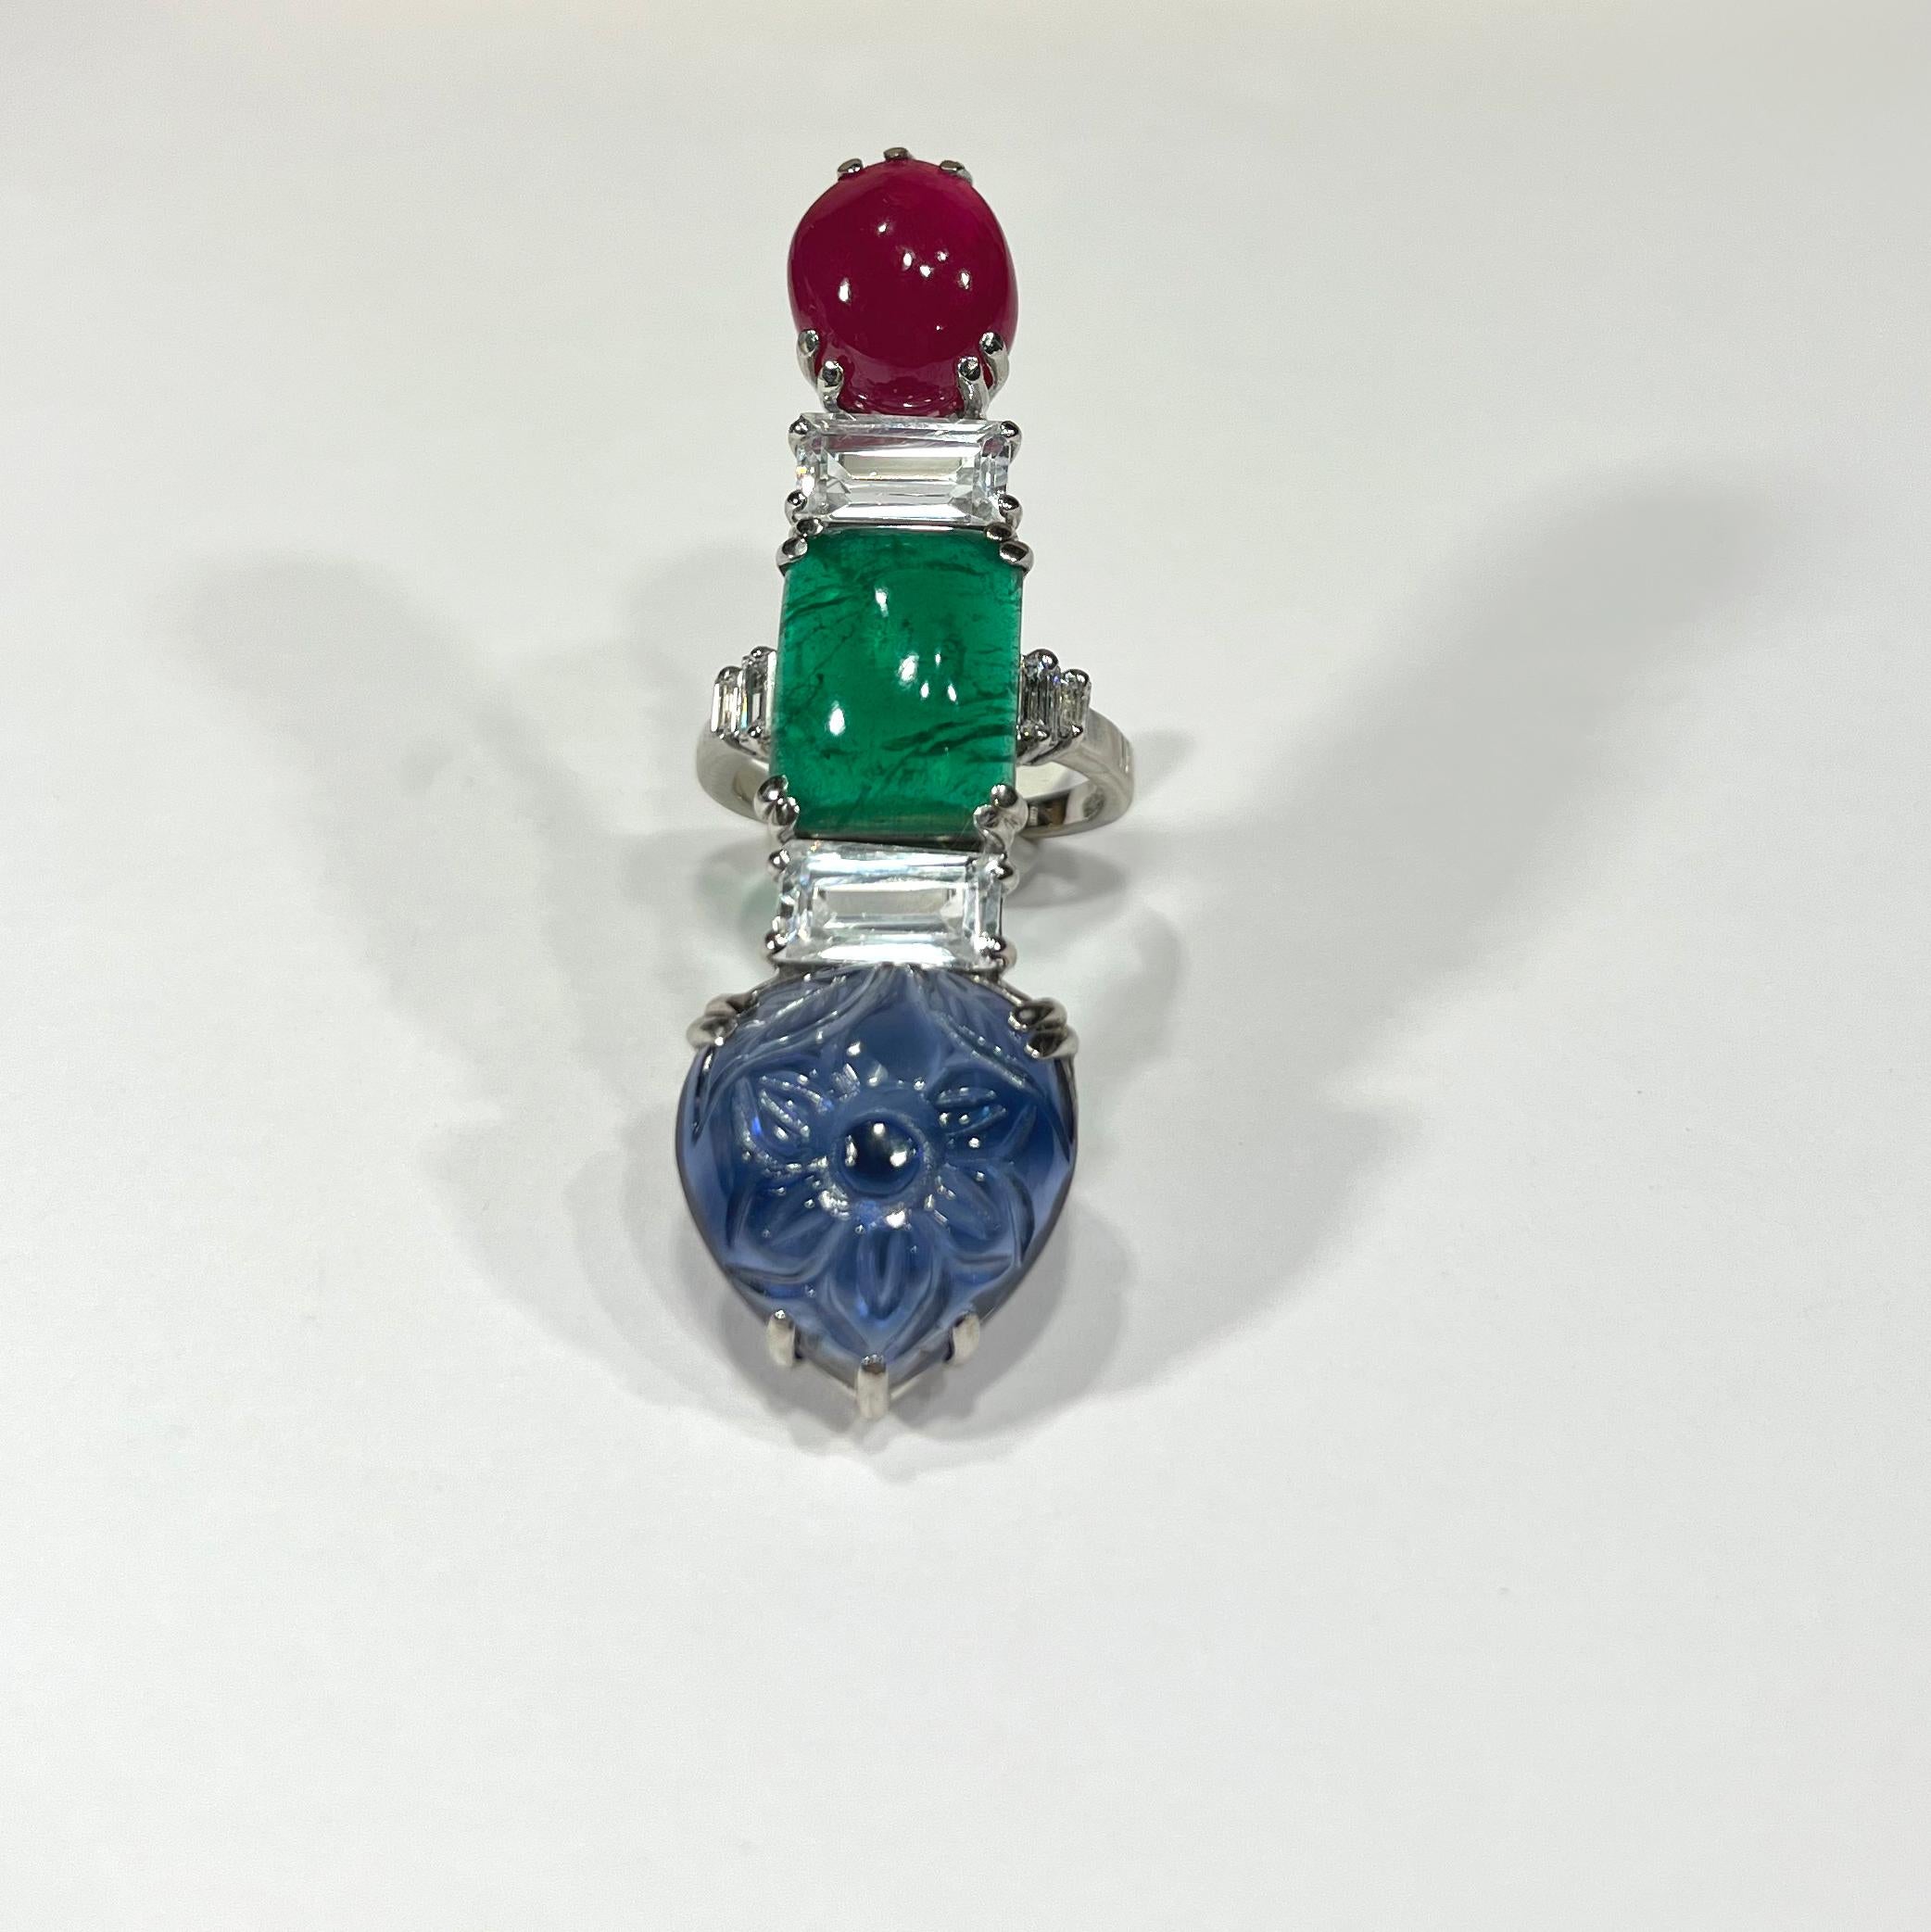 
Art Deco Cartier Style Emerald Fruit Salad Long Cocktail Ring. 
Magnificent copies of the rare and authentic. Lab-grown ruby, diamond, and cabochon emerald measuring 2 inches long by 3/4 inches wide.  Stunning Art Deco looks completely real